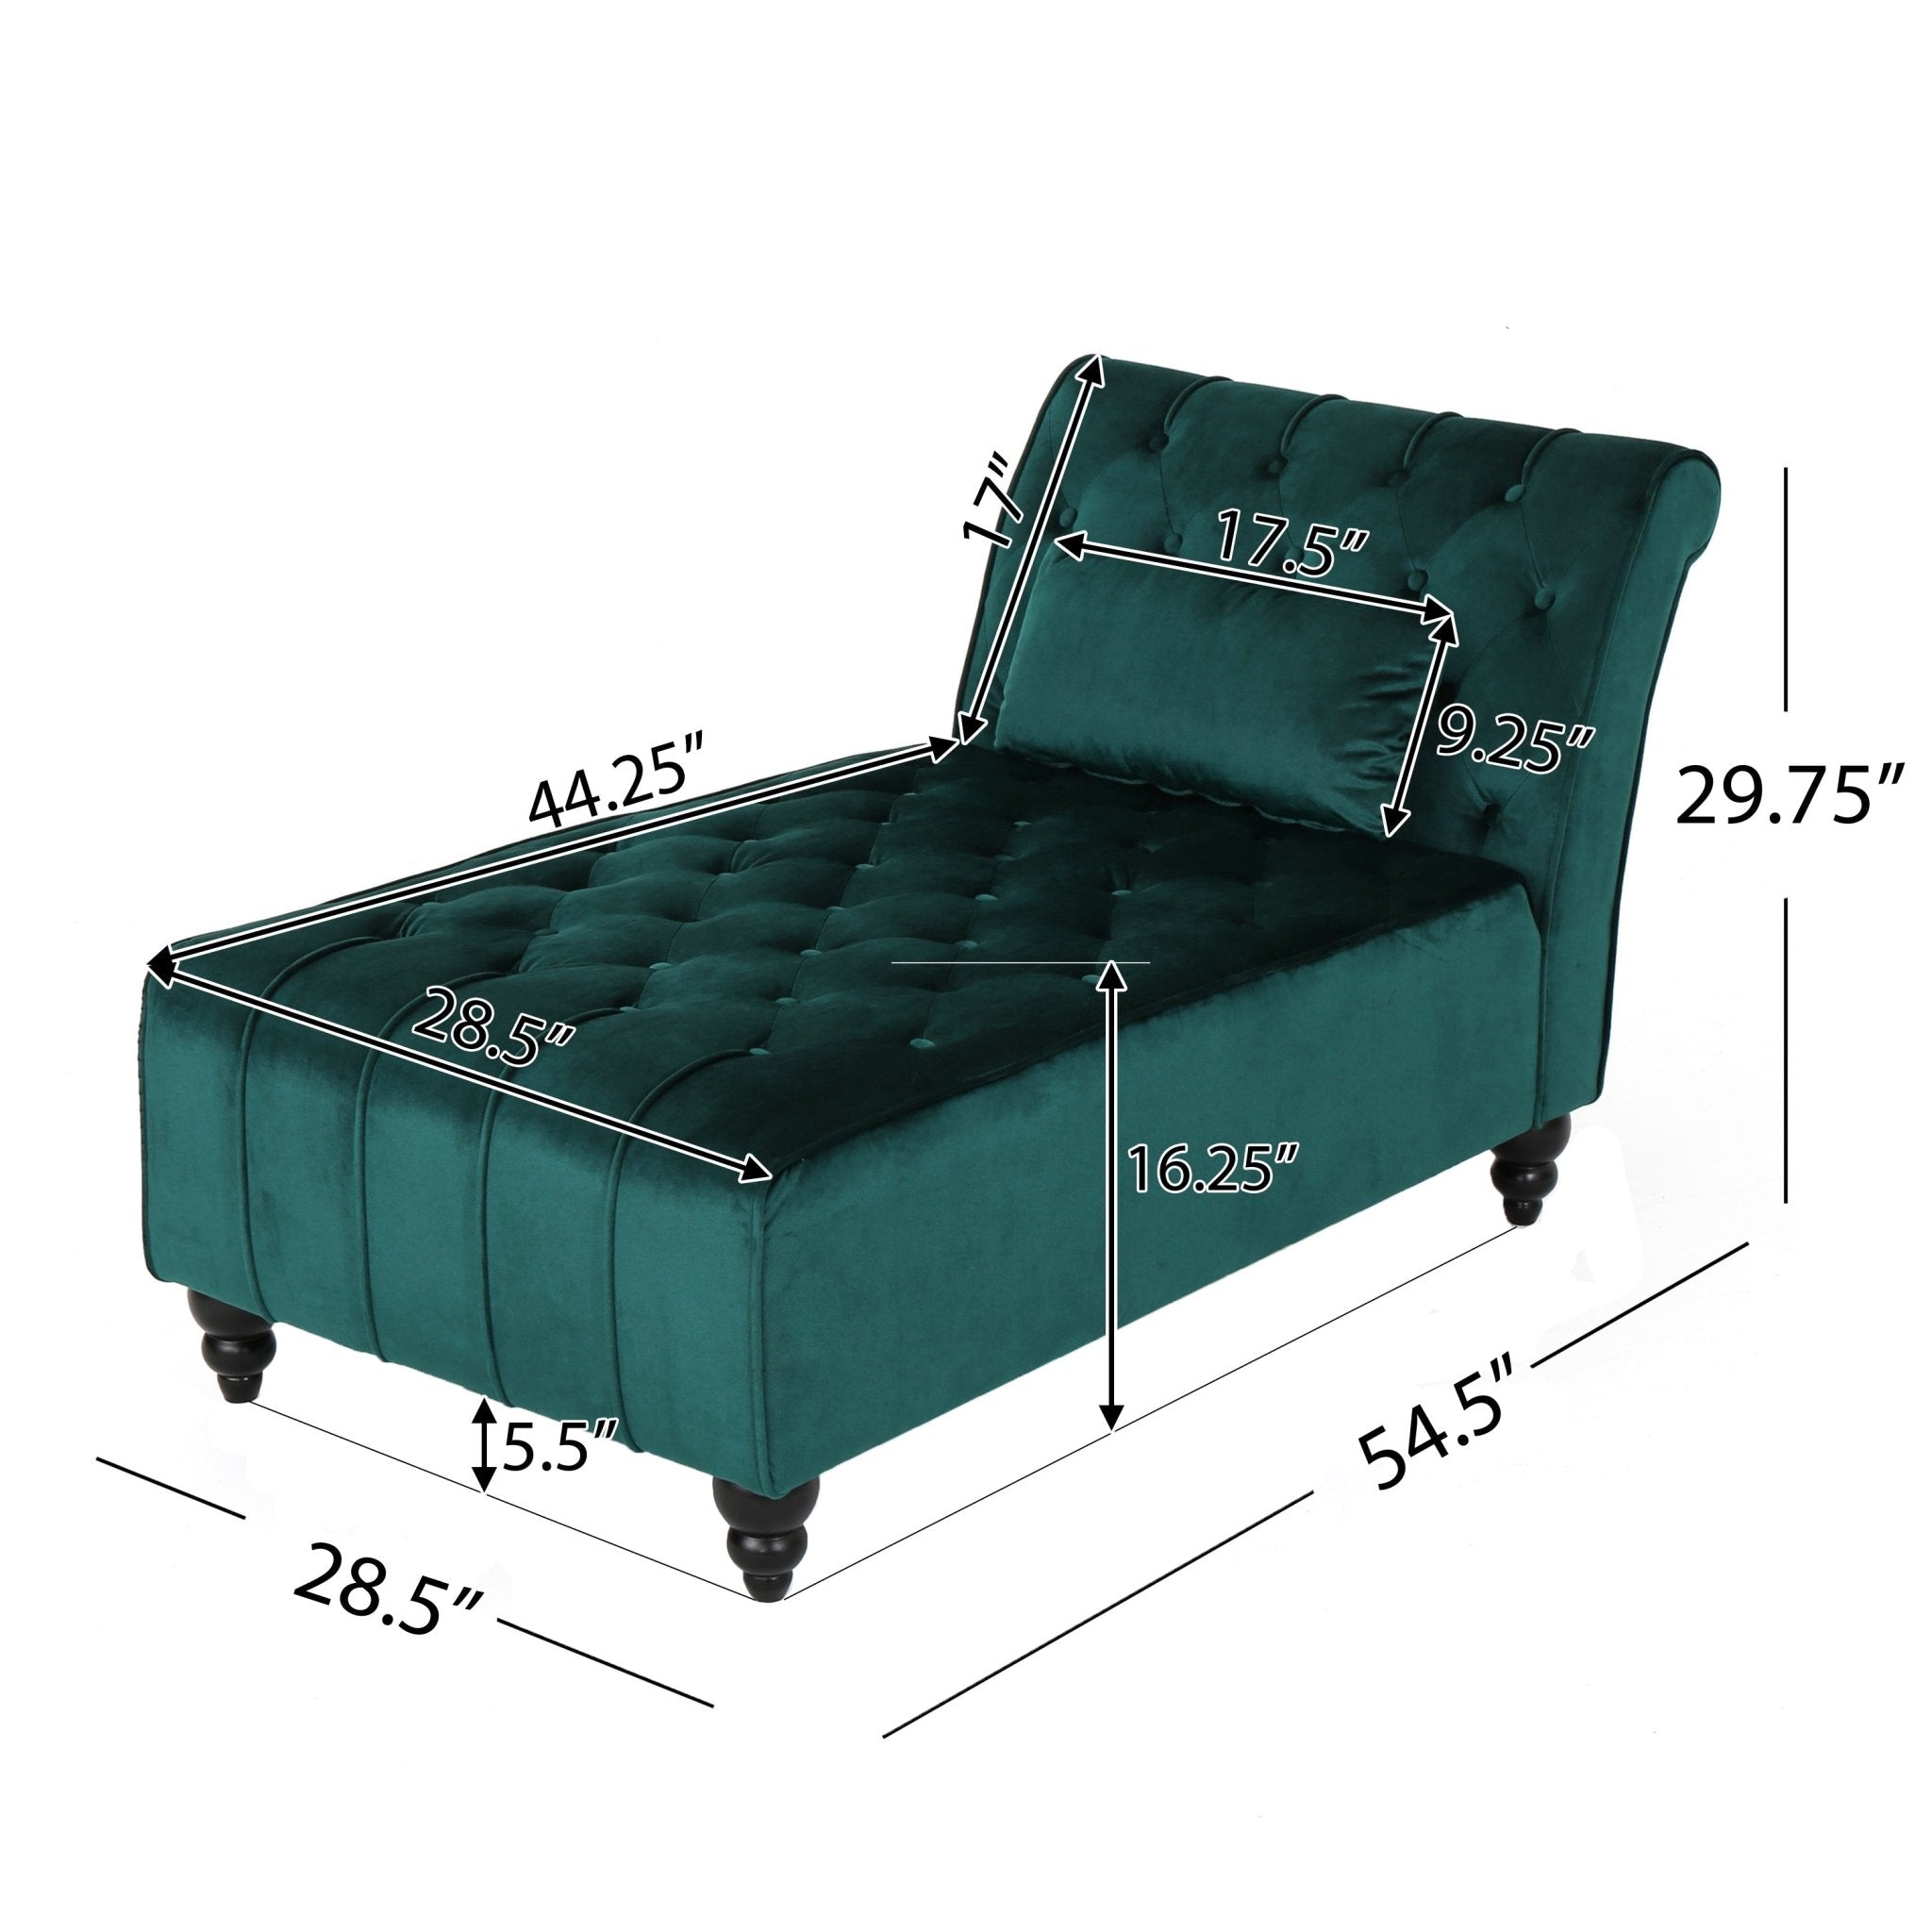 Upholstered Chaise Lounge with Diamond Tufted - Chaise Lounge